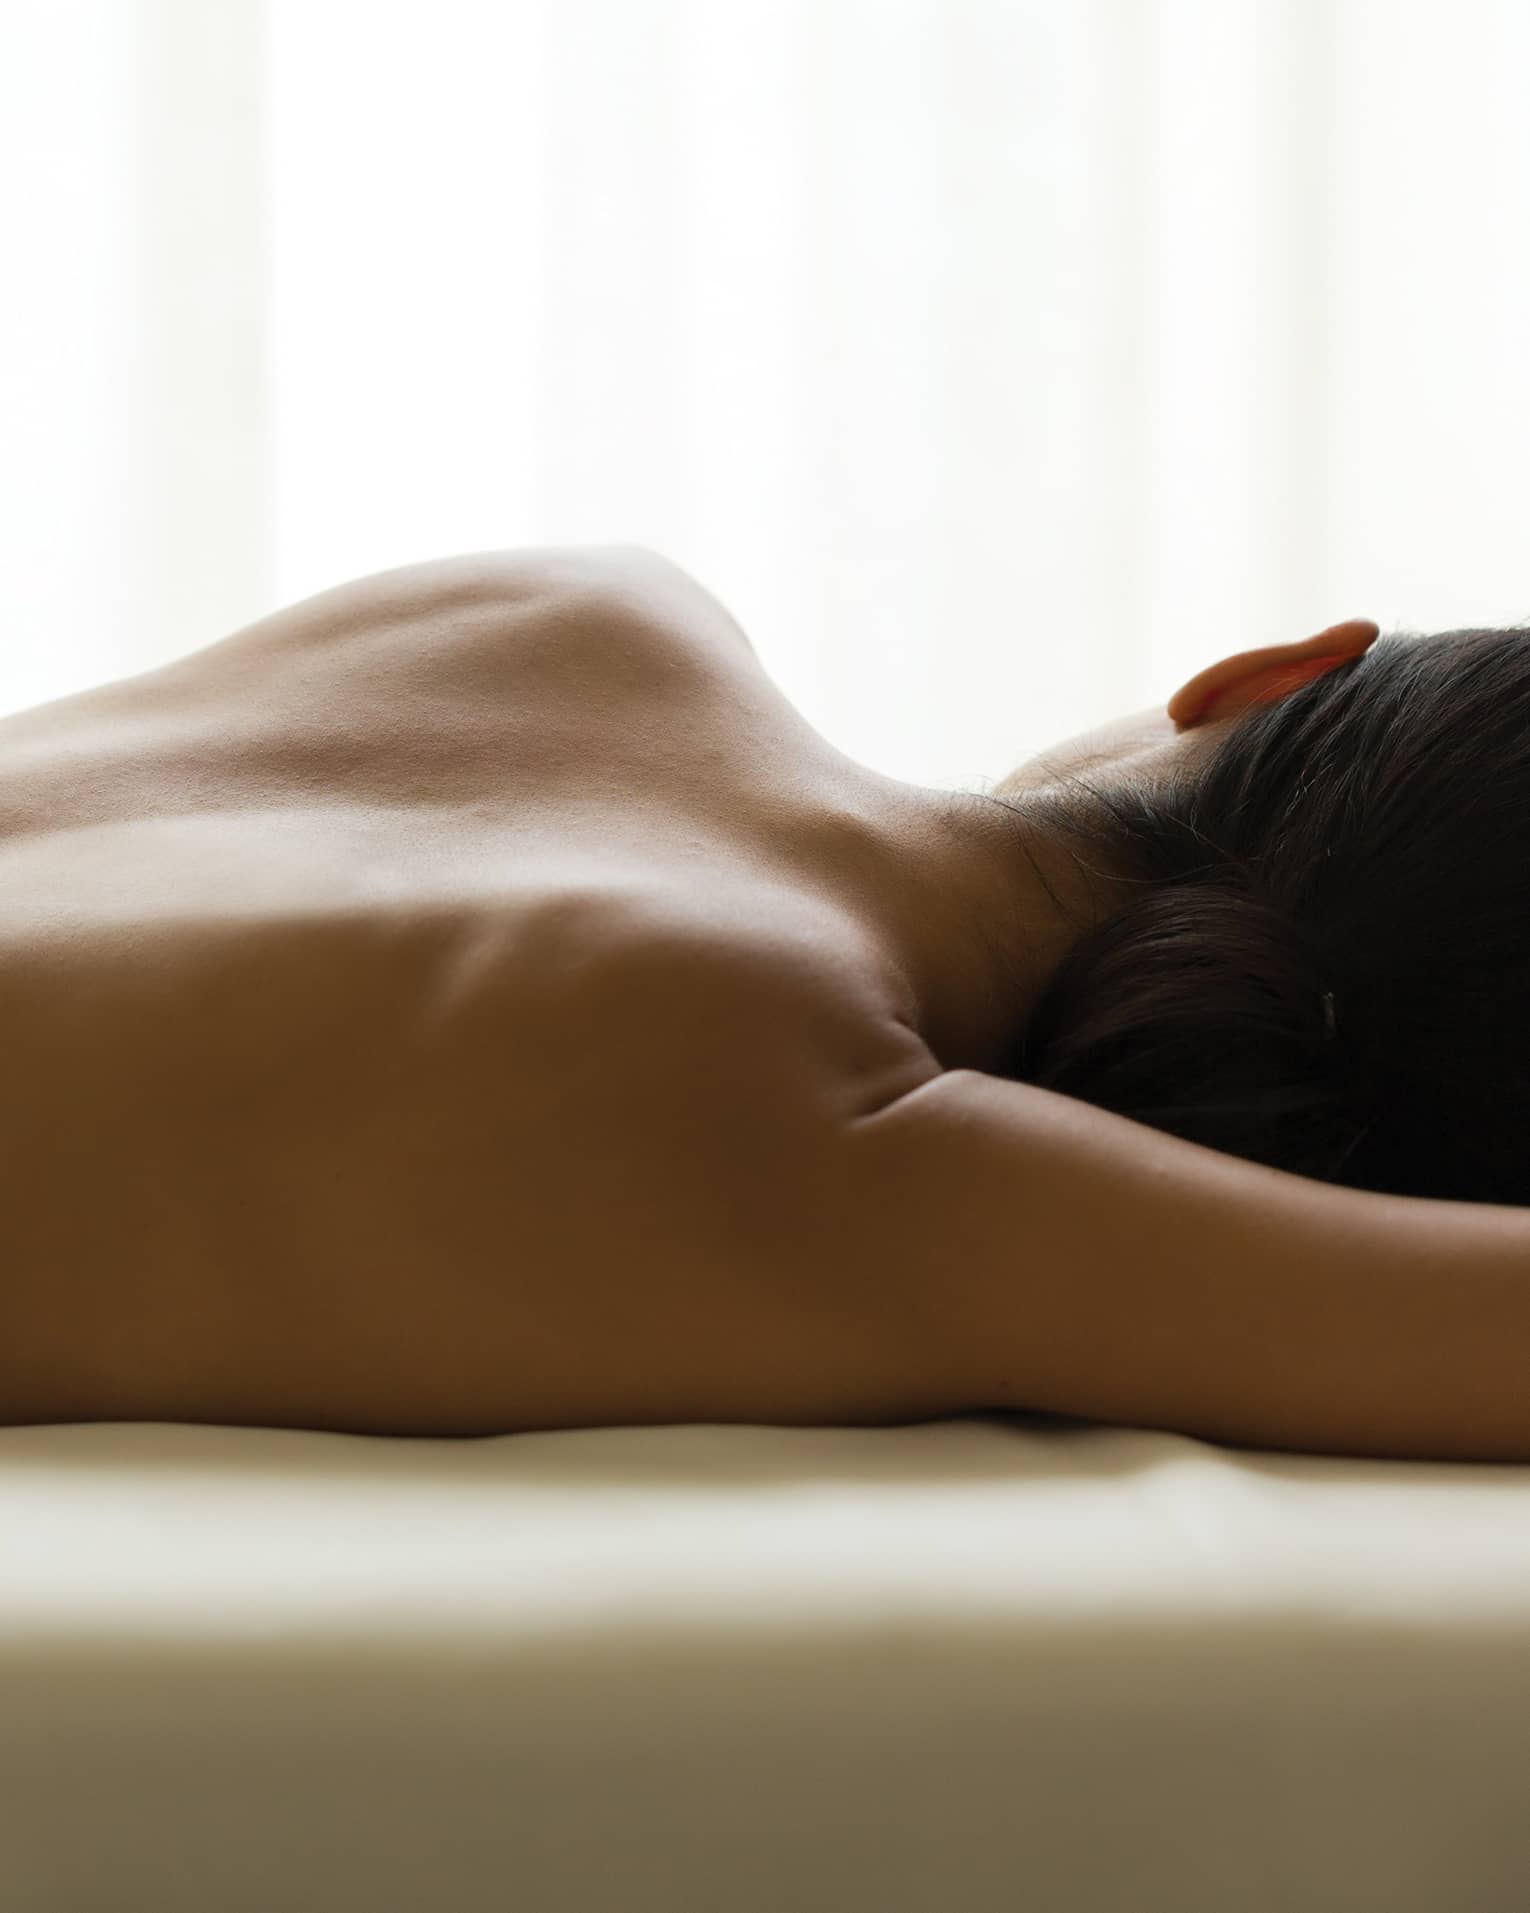 Woman's bare back as she lays on massage table under window, white curtains